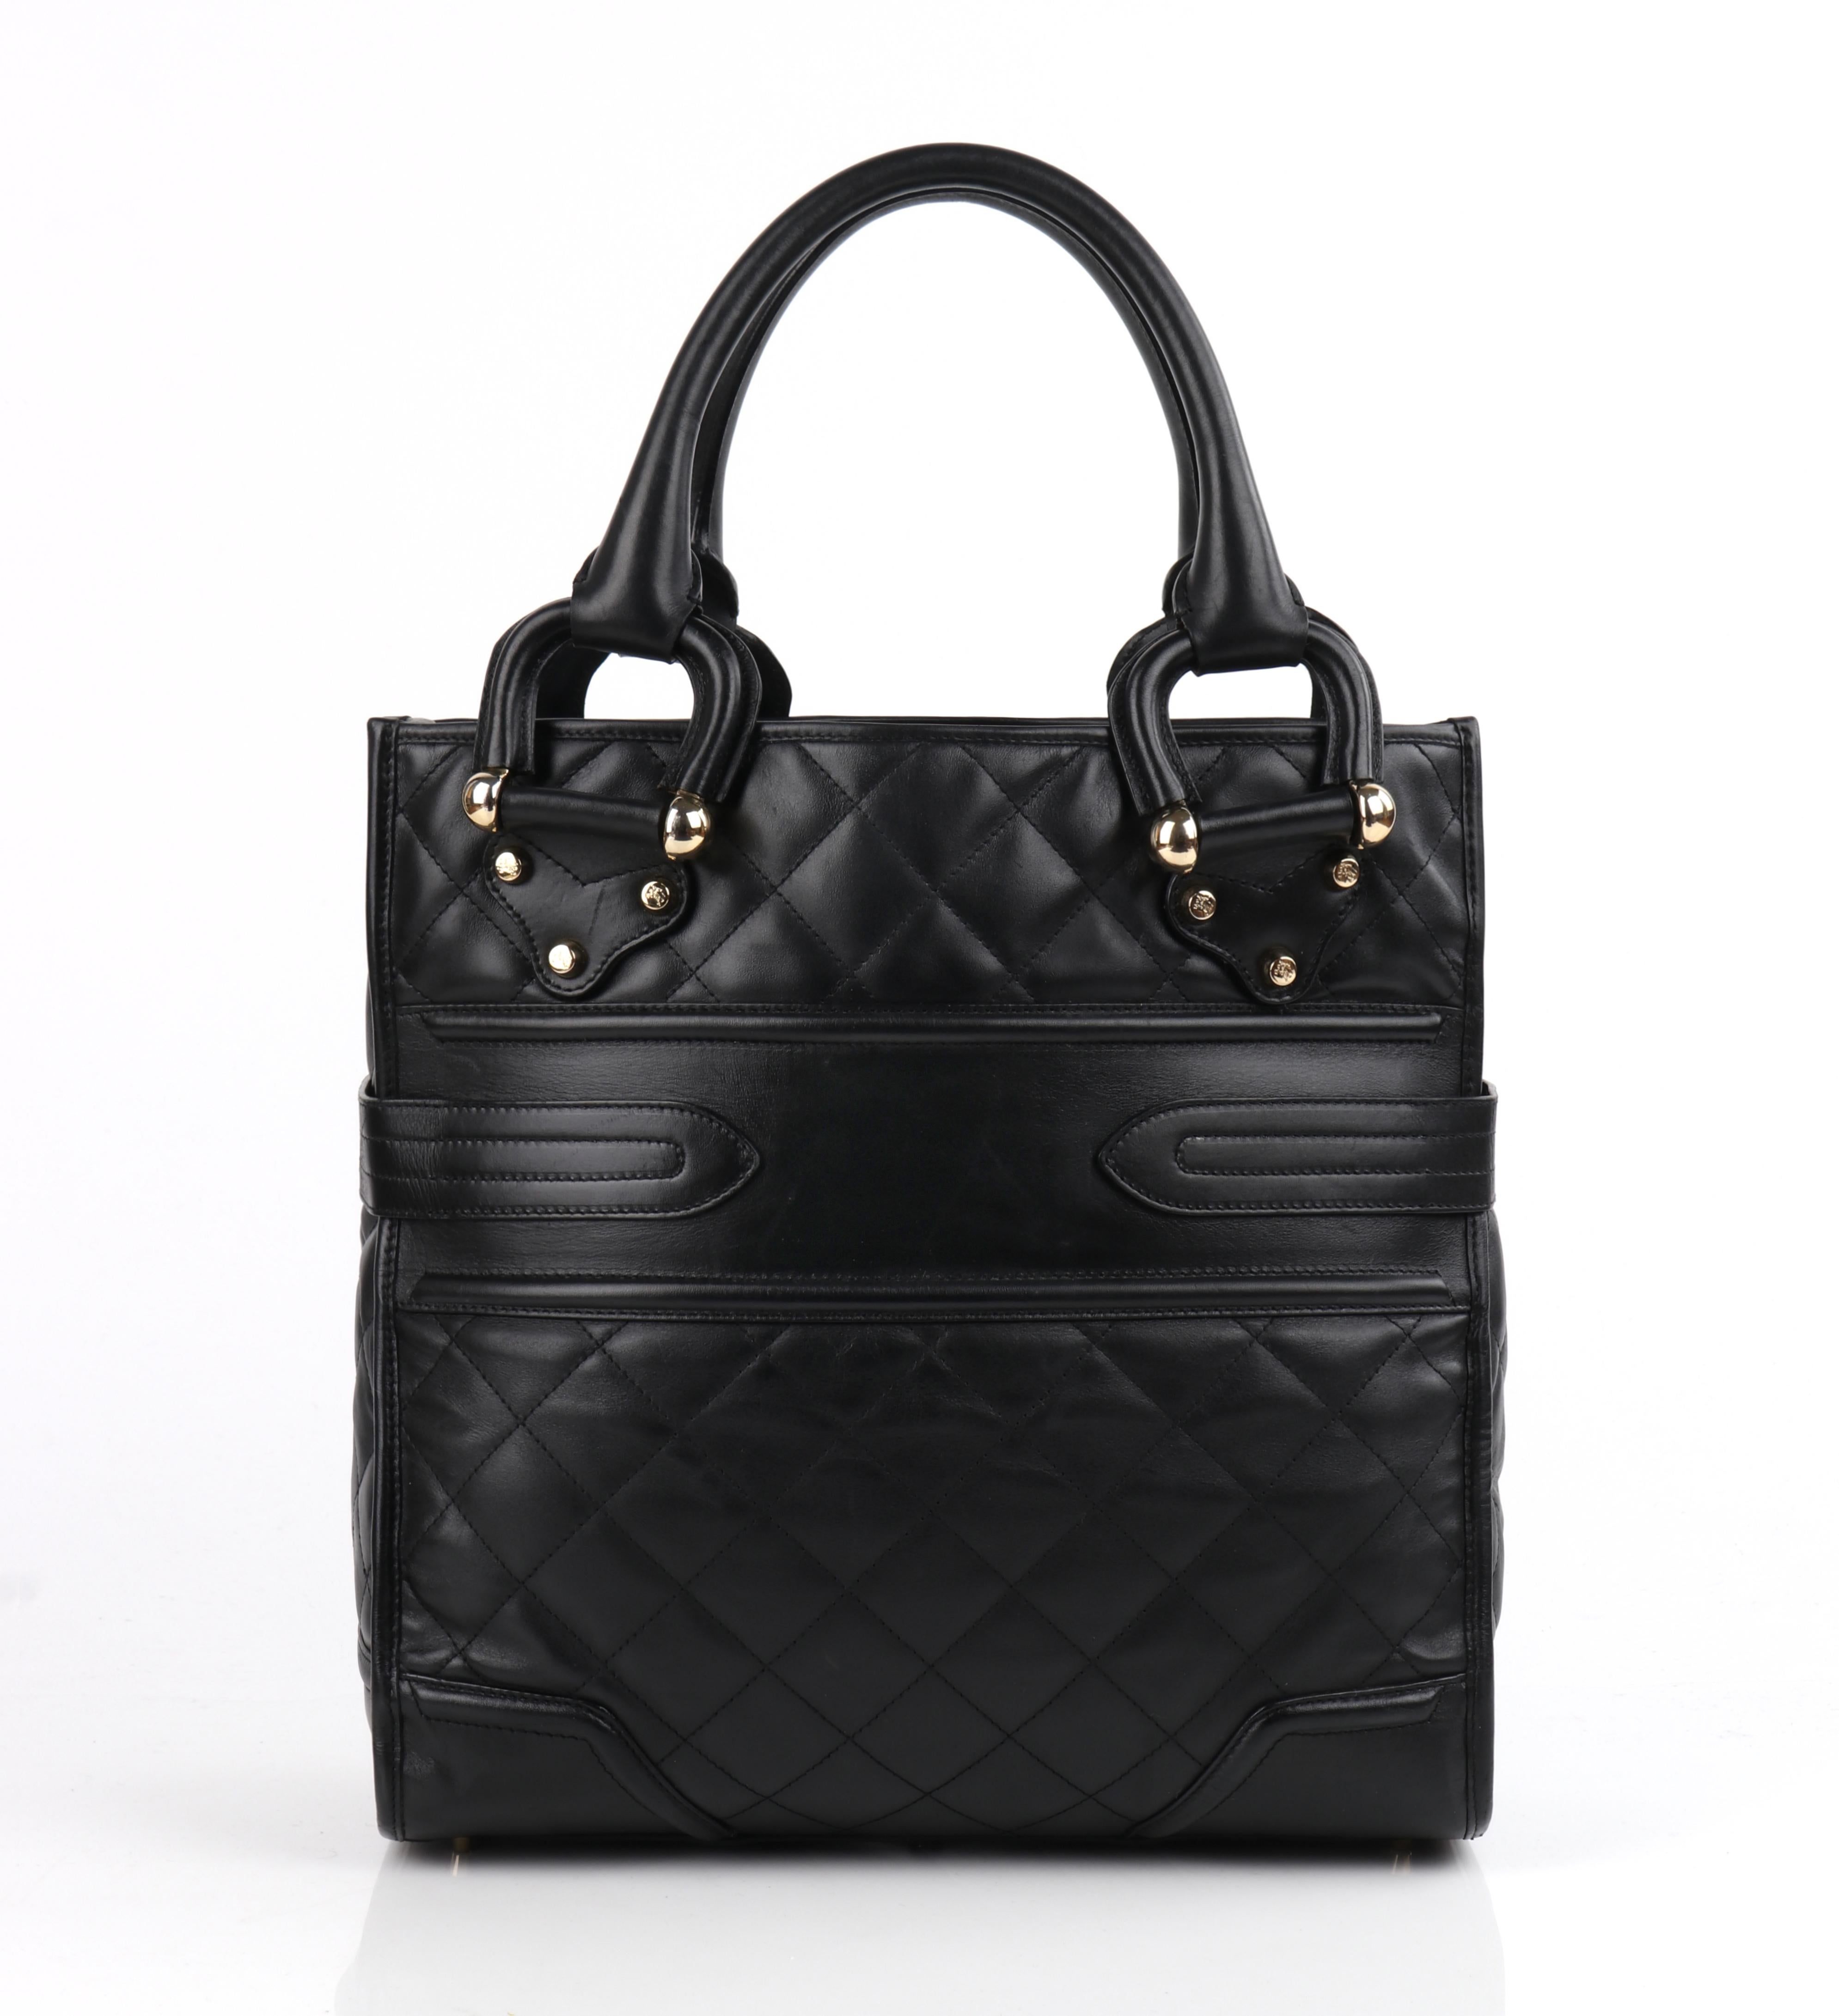 BURBERRY Prorsum Manor Style Quilted Top Handle Buckle Detail Handbag Purse

Burberry Prorsum A/W 2007 runway collection black leather 